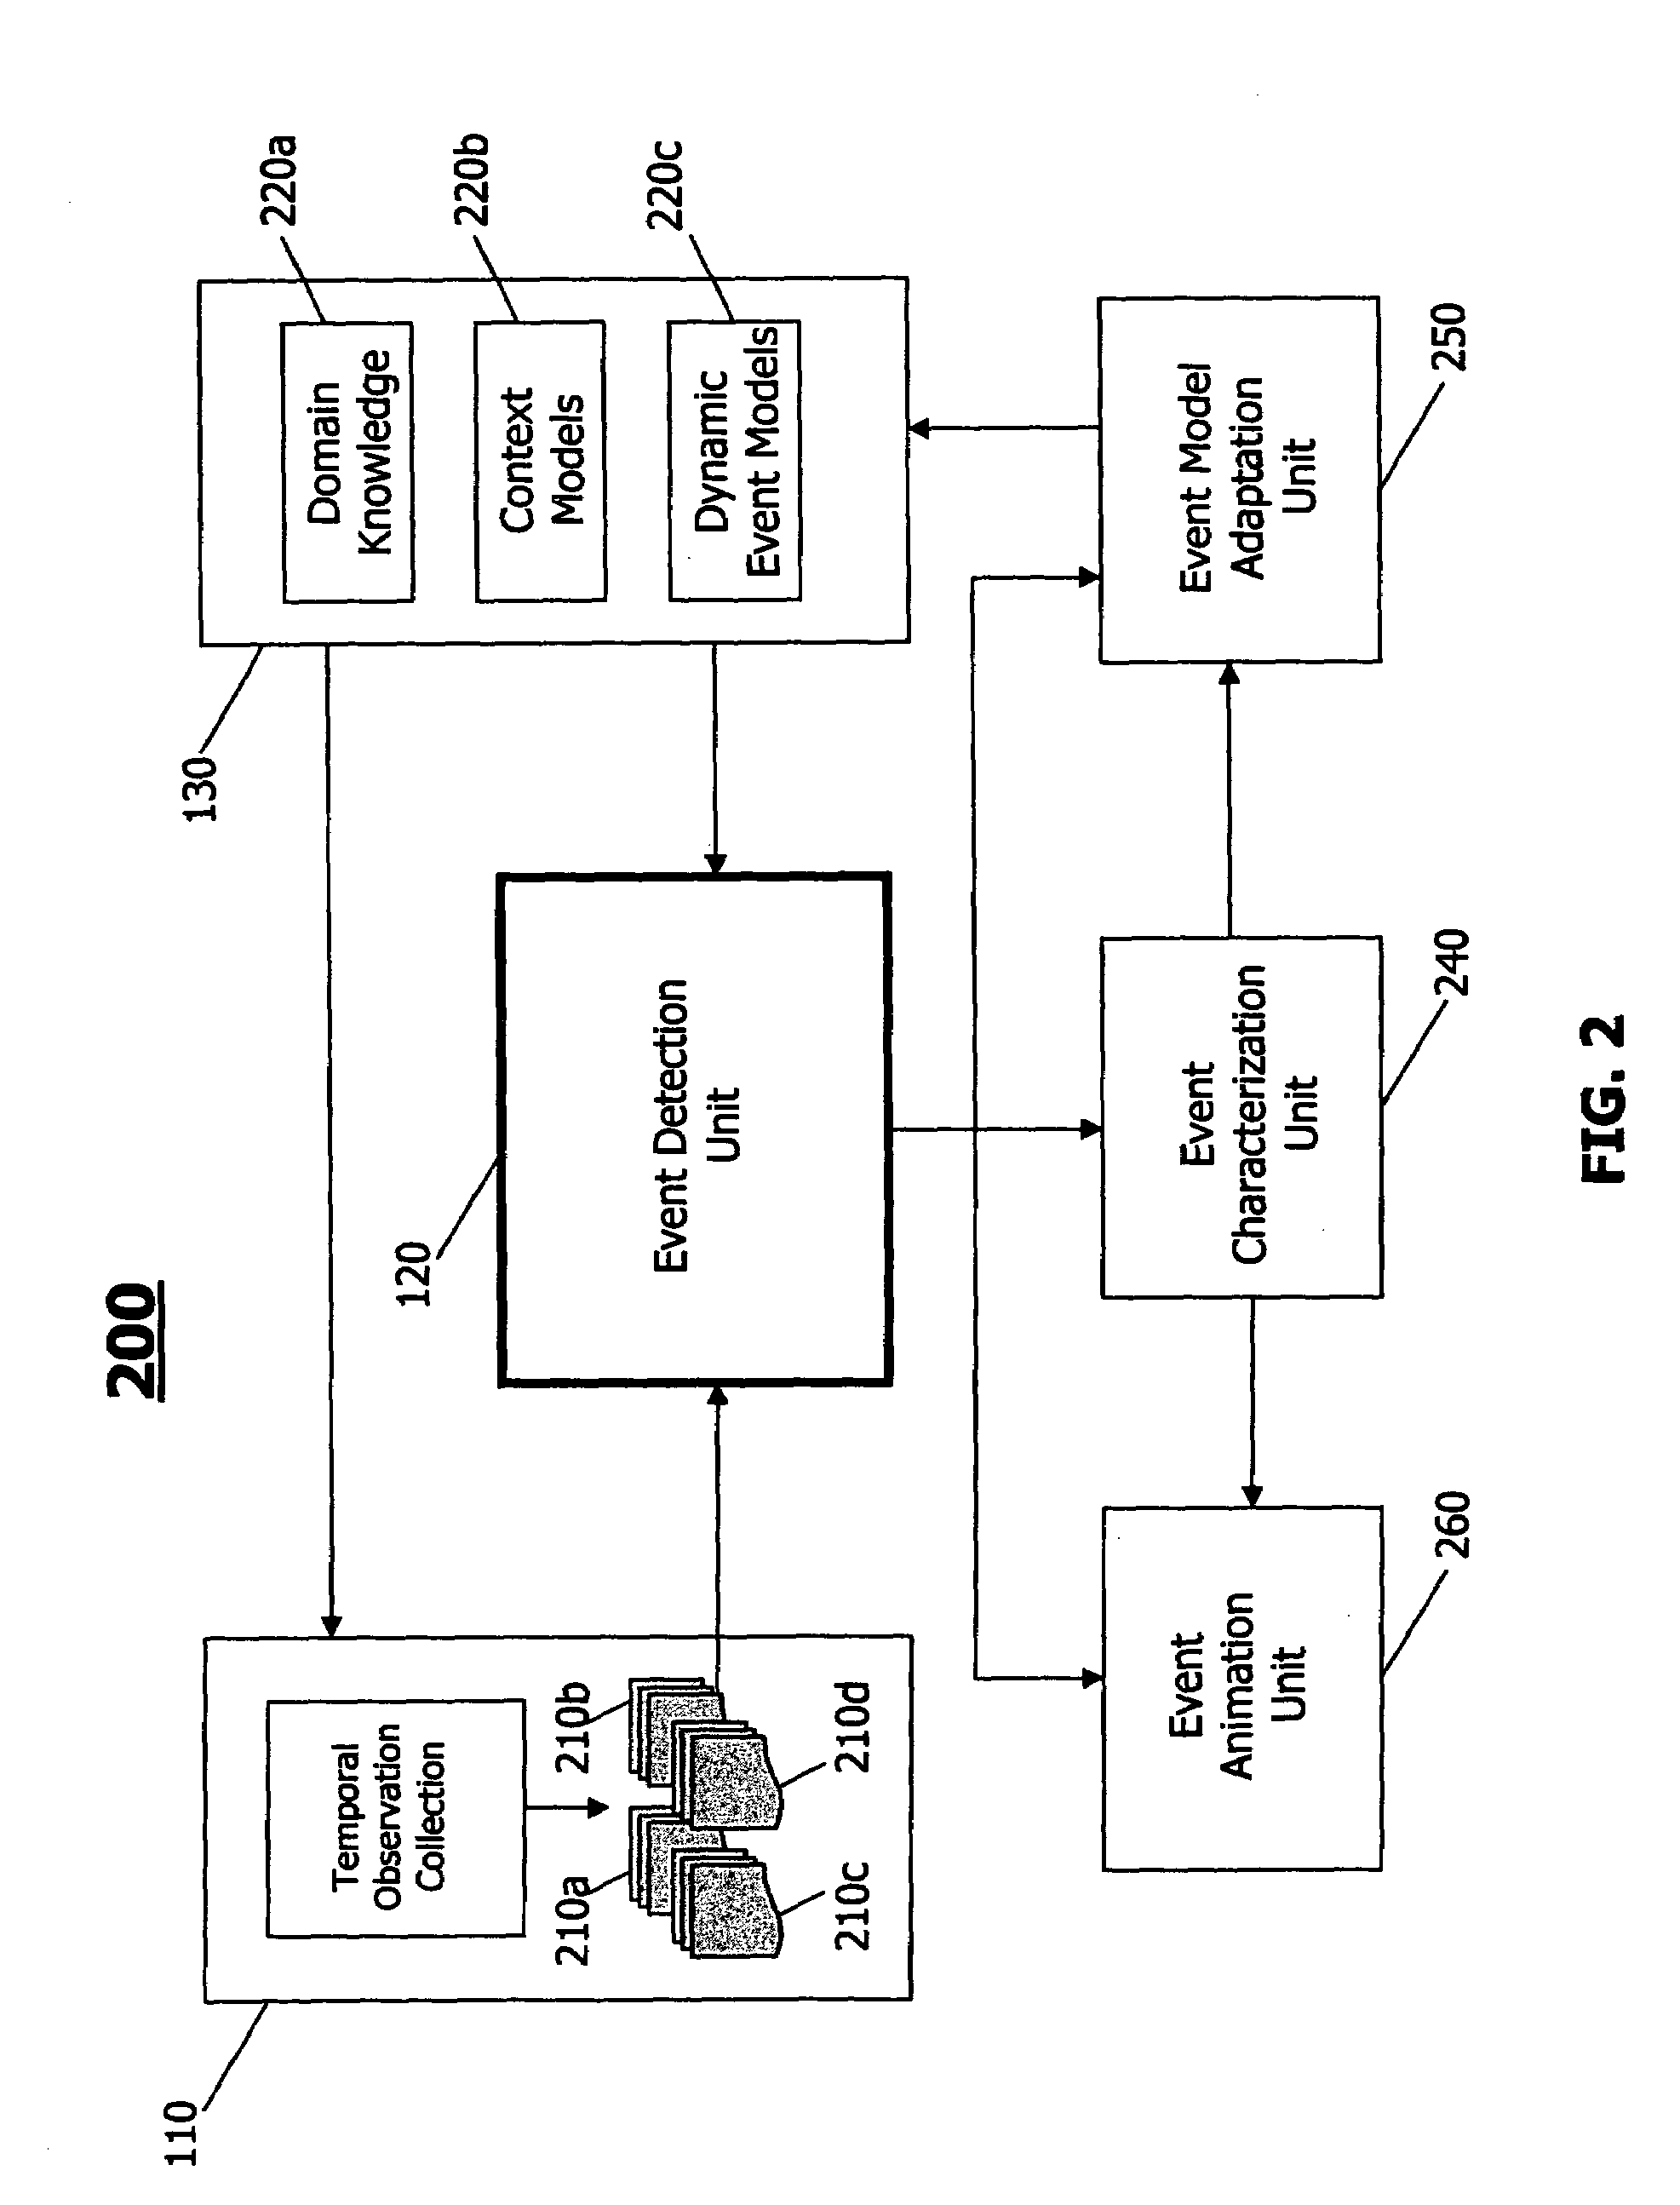 Method and system for detecting semantic events